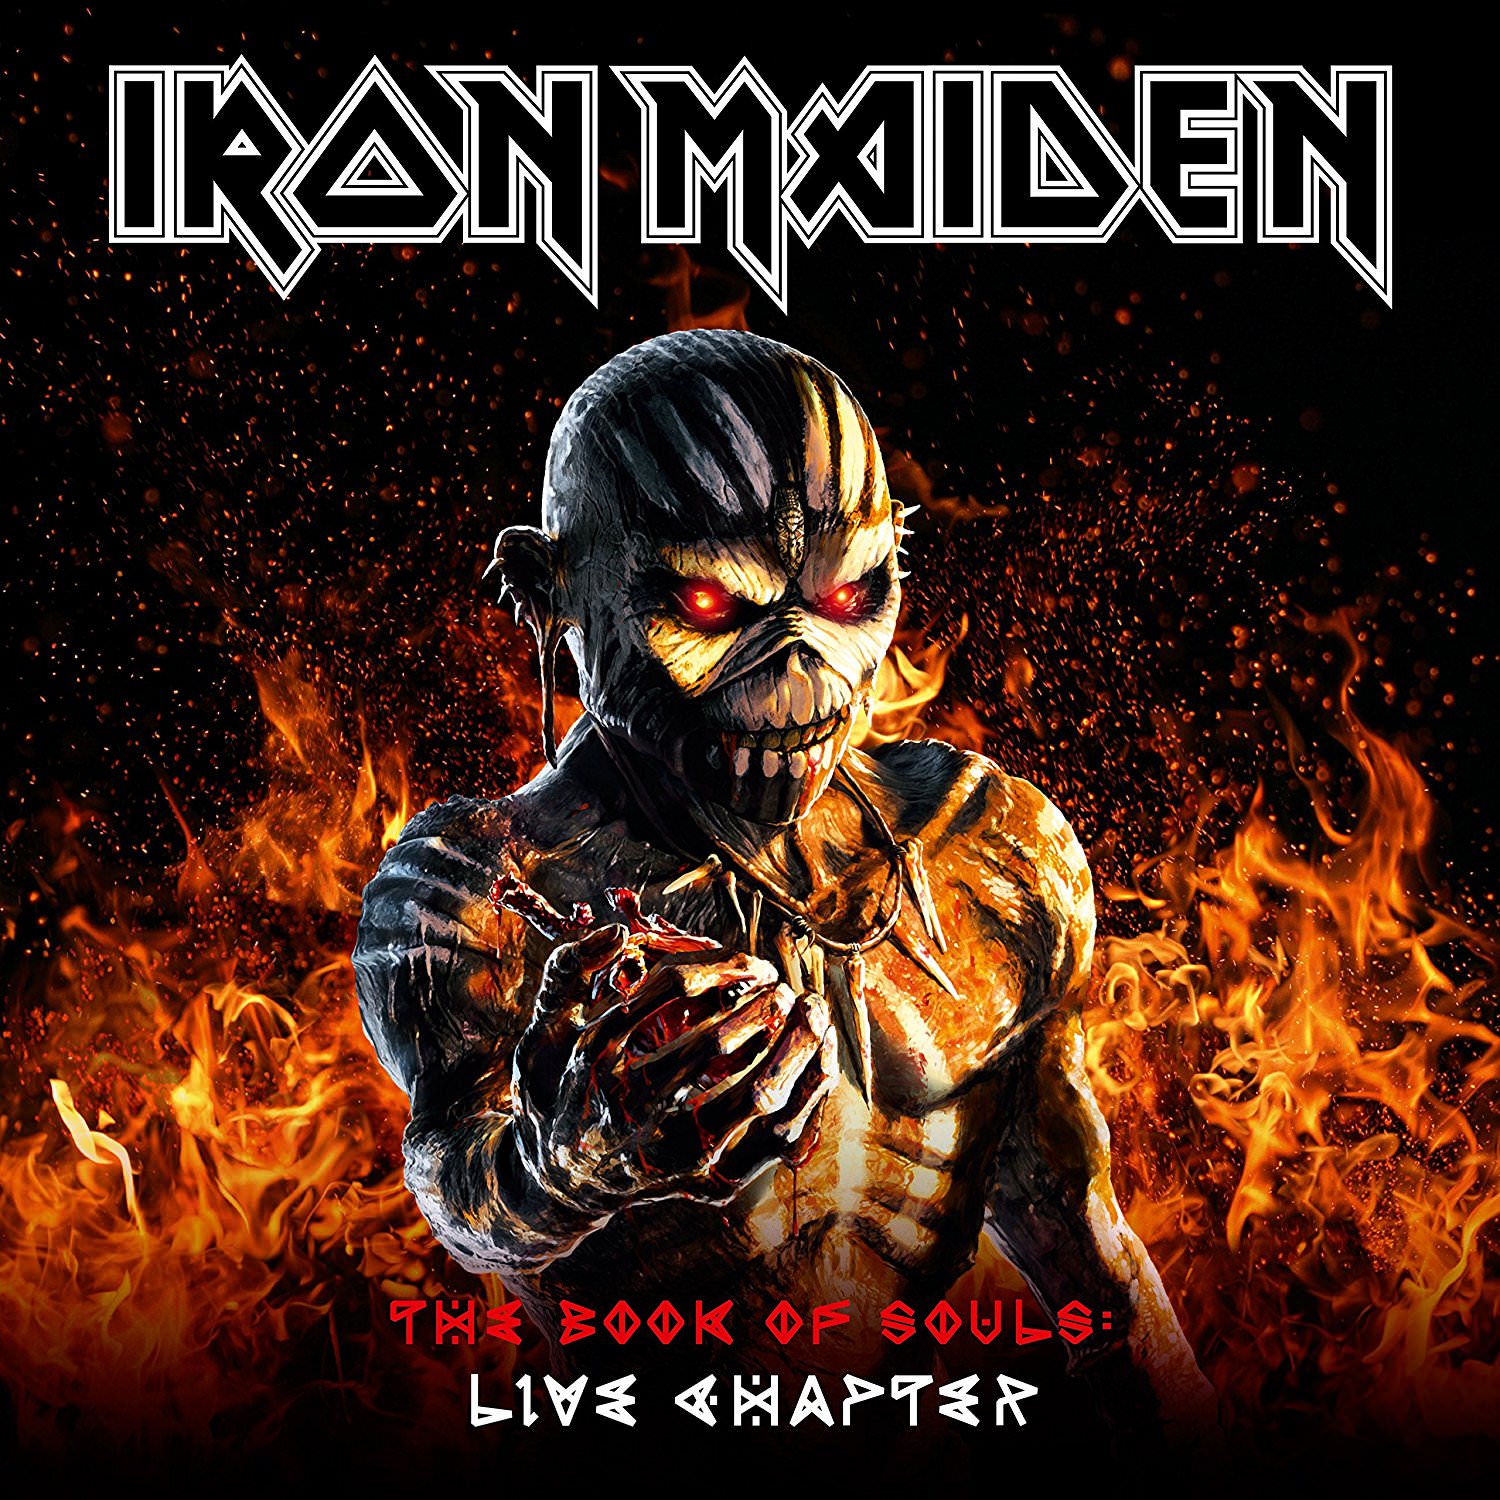 Iron Maiden - The Book Of Souls: Live Chapter (2017) [Tidal FLAC 24bit/48kHz]